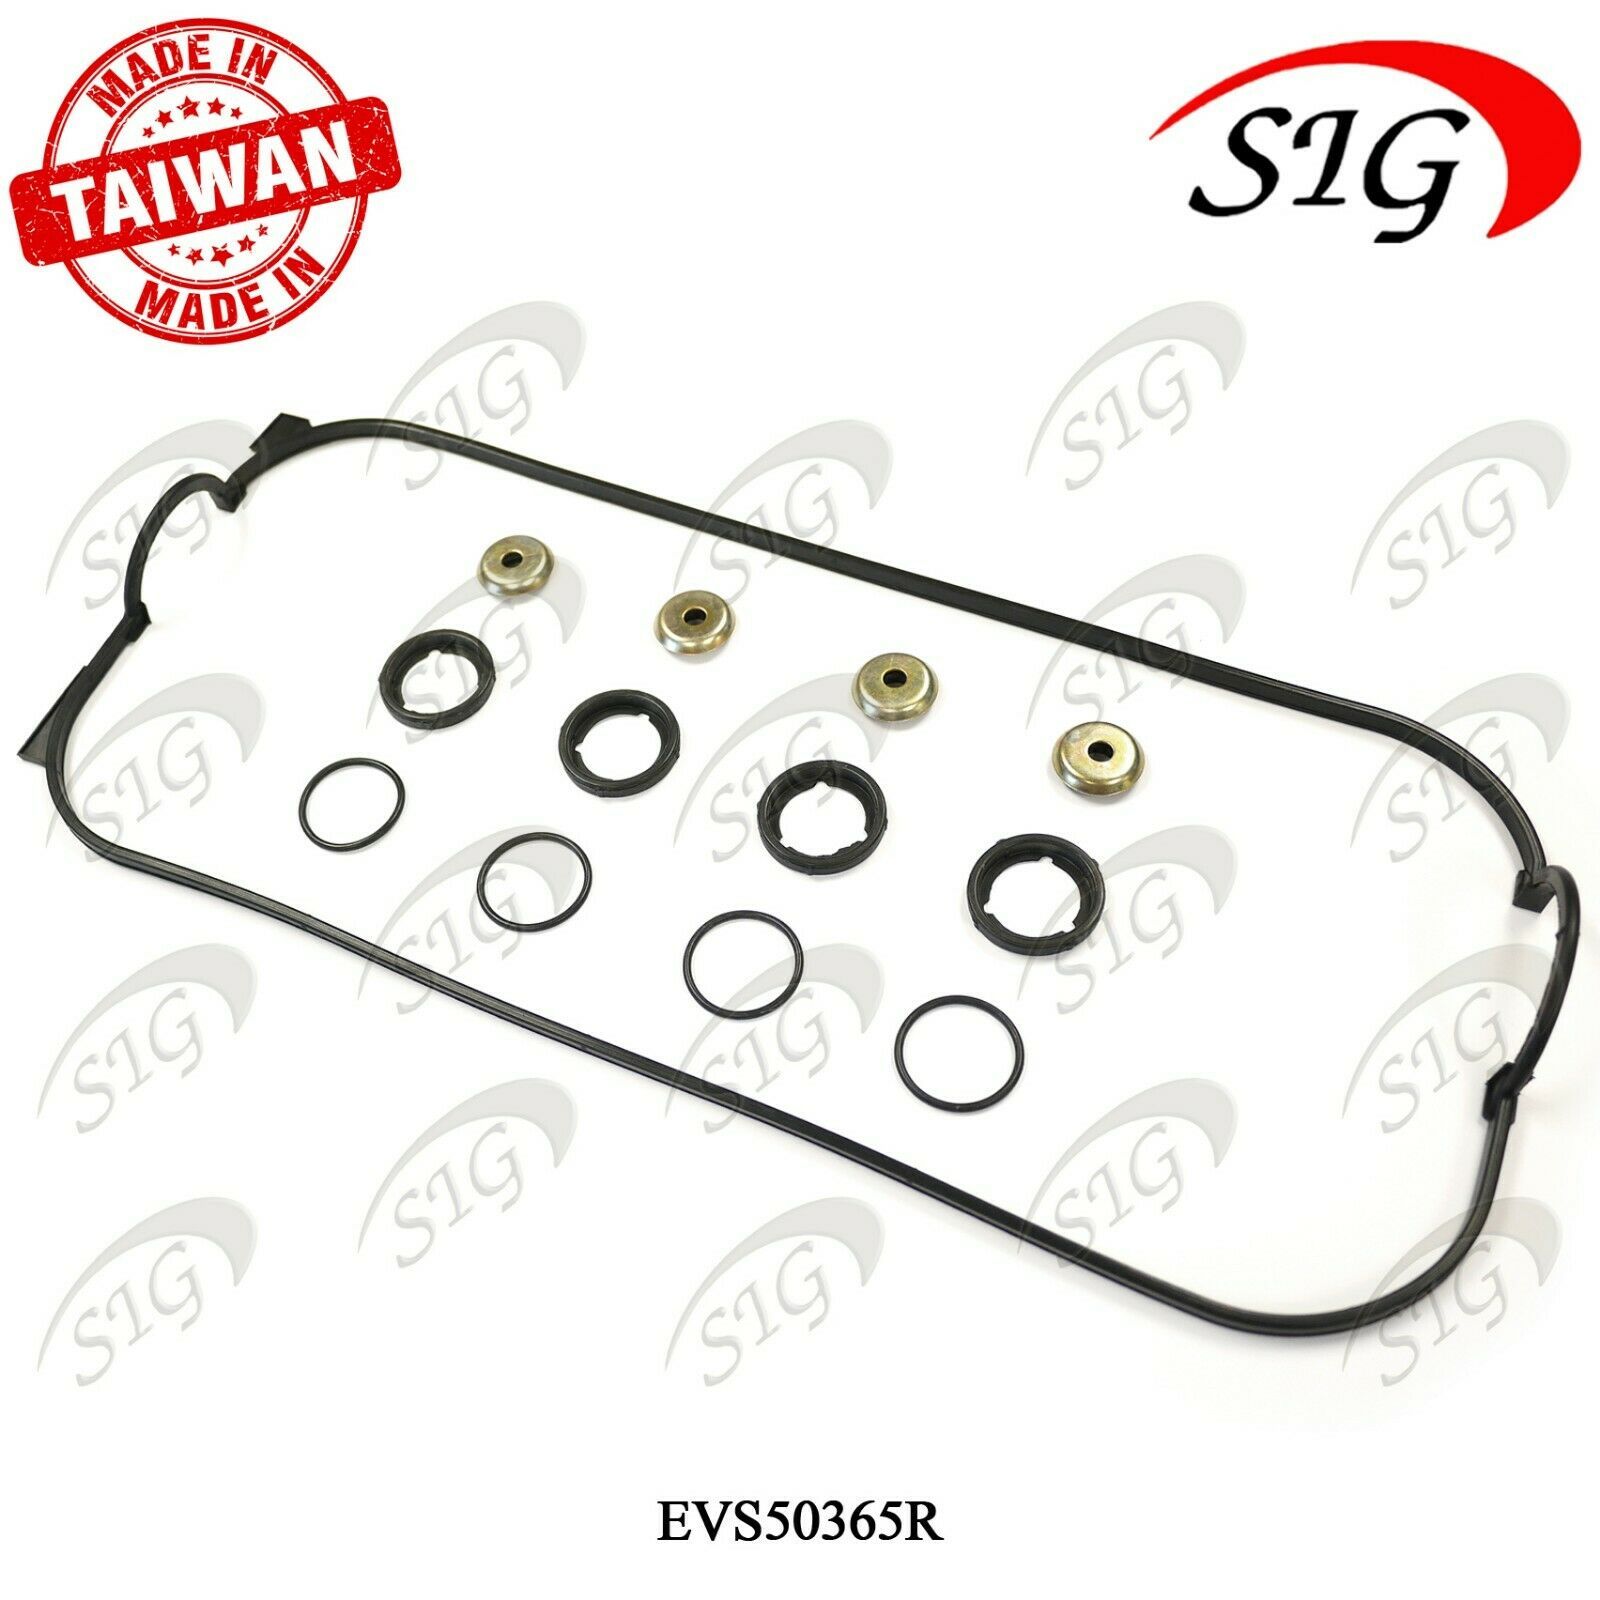 2011 honda odyssey valve cover gasket replacement